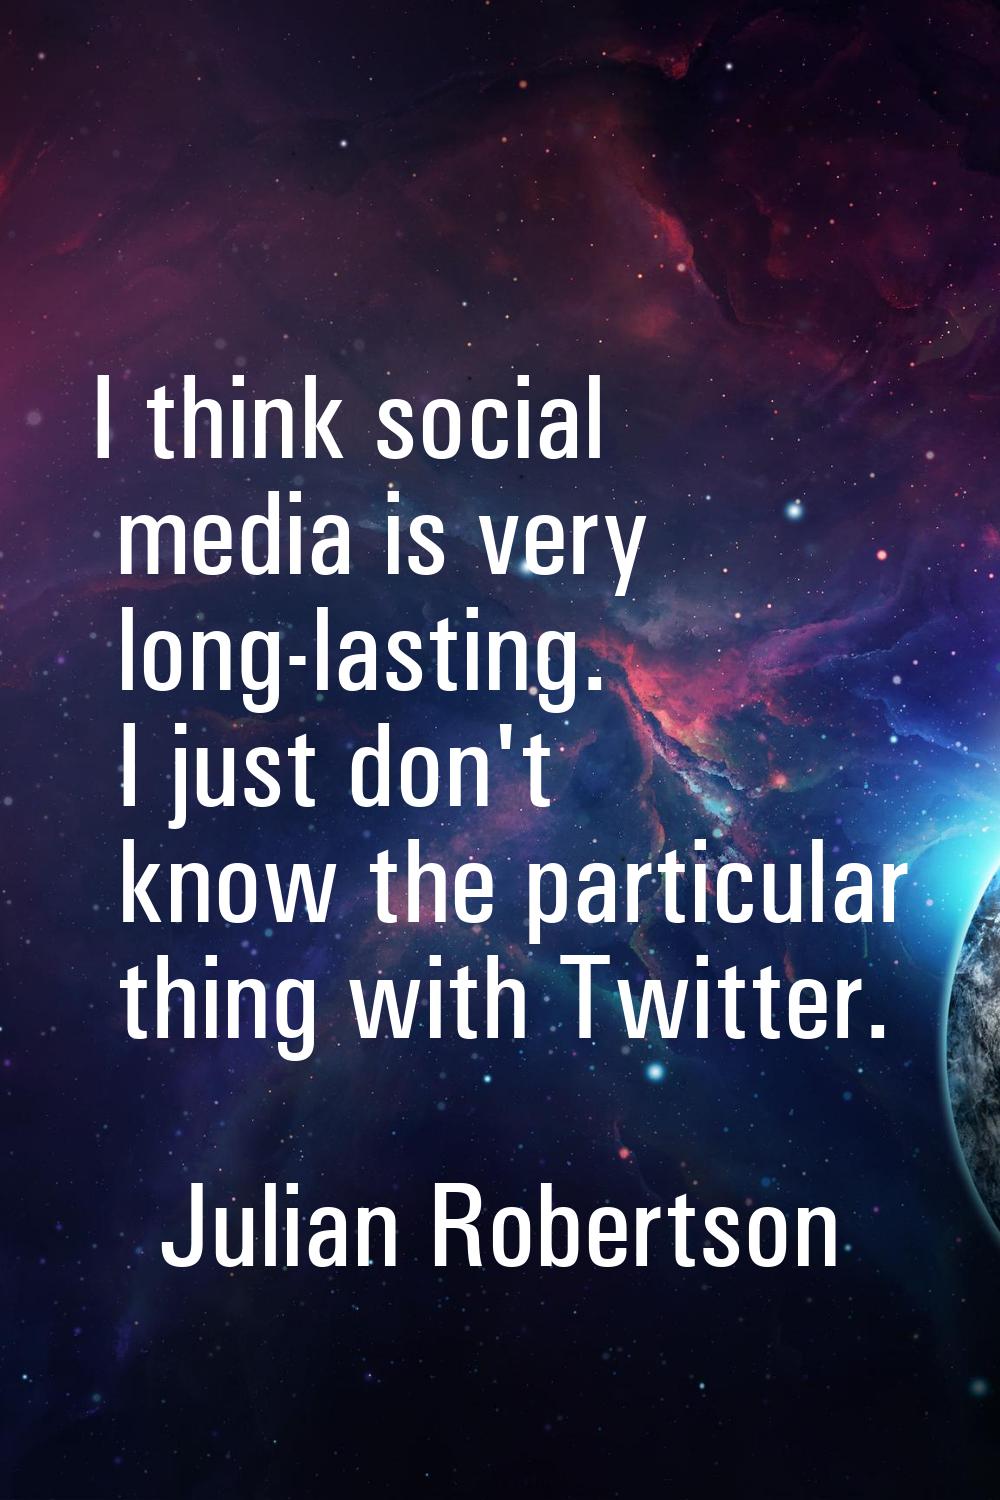 I think social media is very long-lasting. I just don't know the particular thing with Twitter.